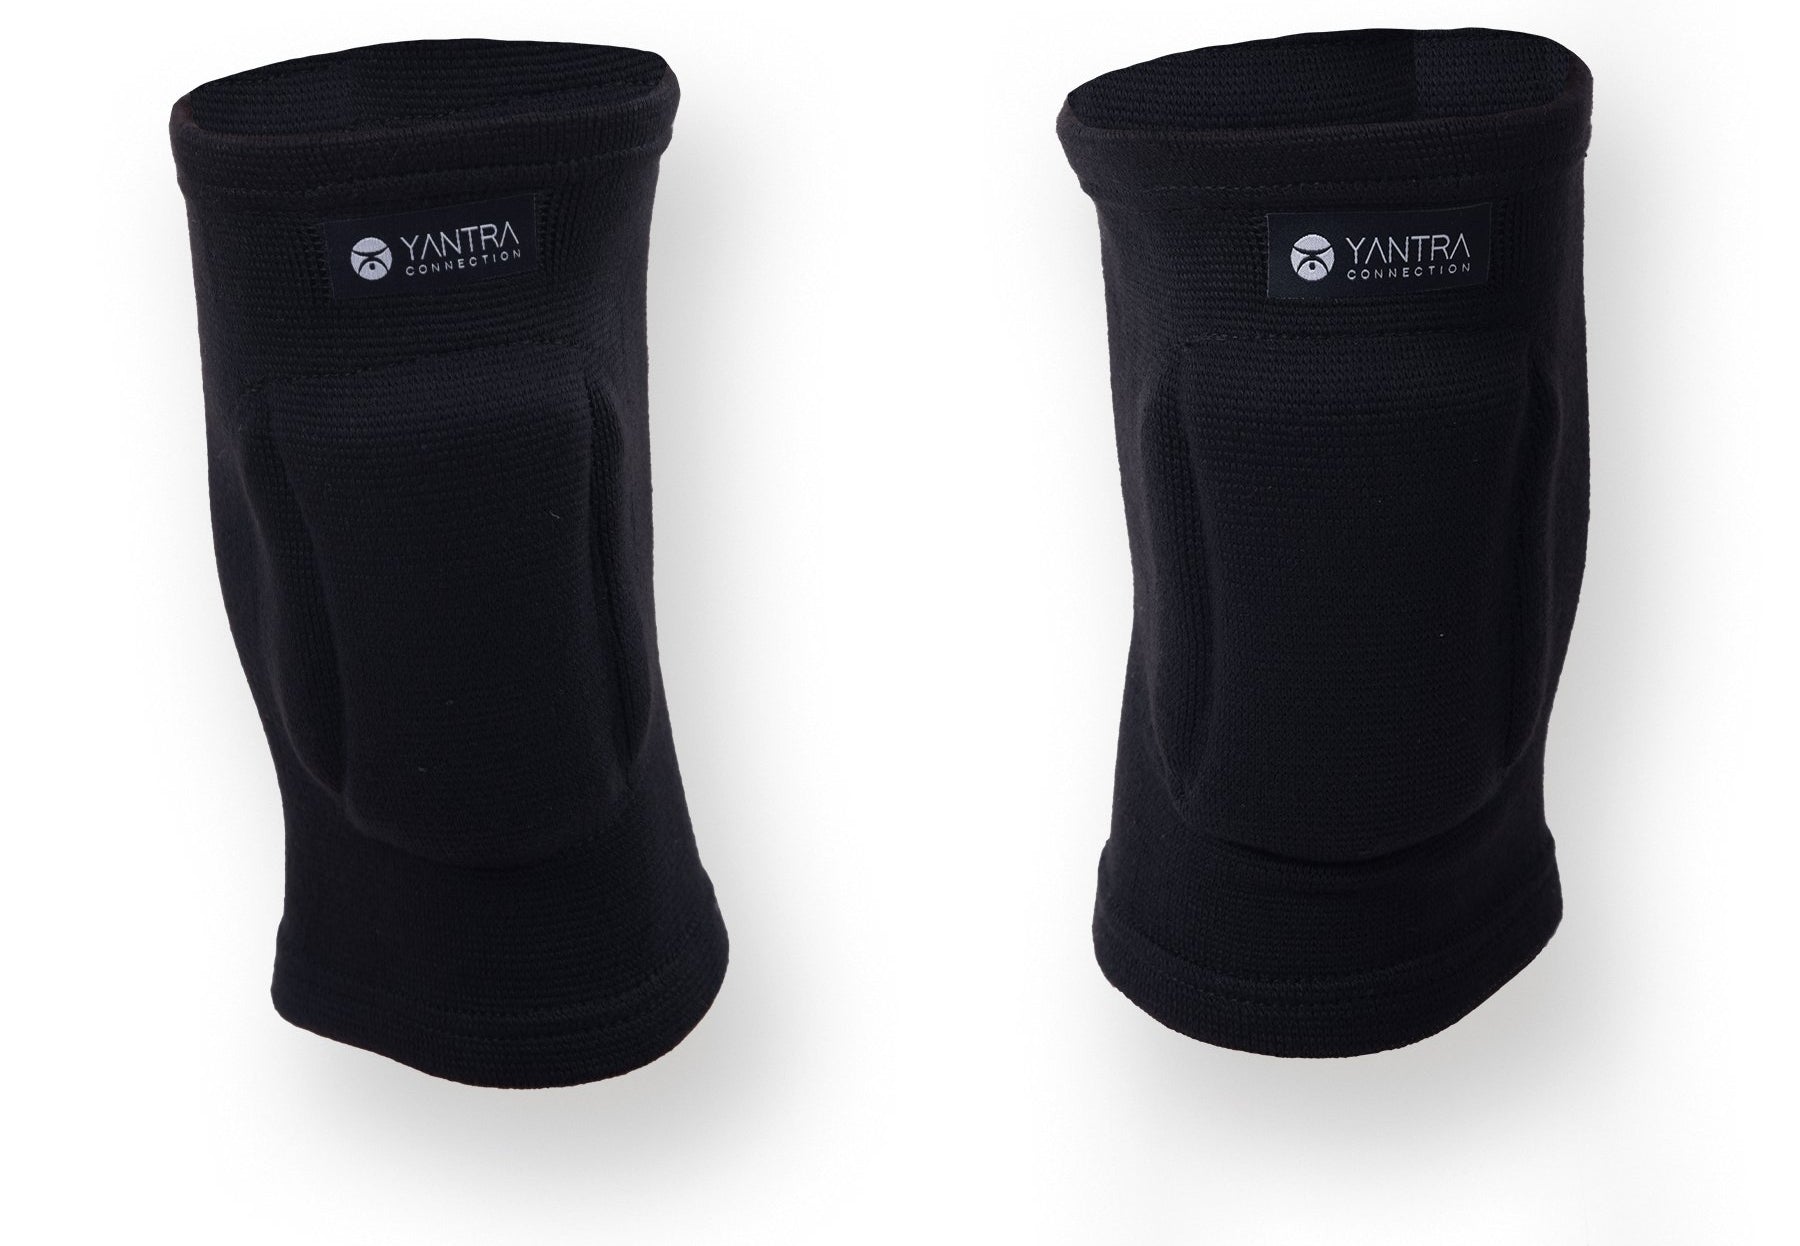 YANTRA Knee Protection - YantraConnection